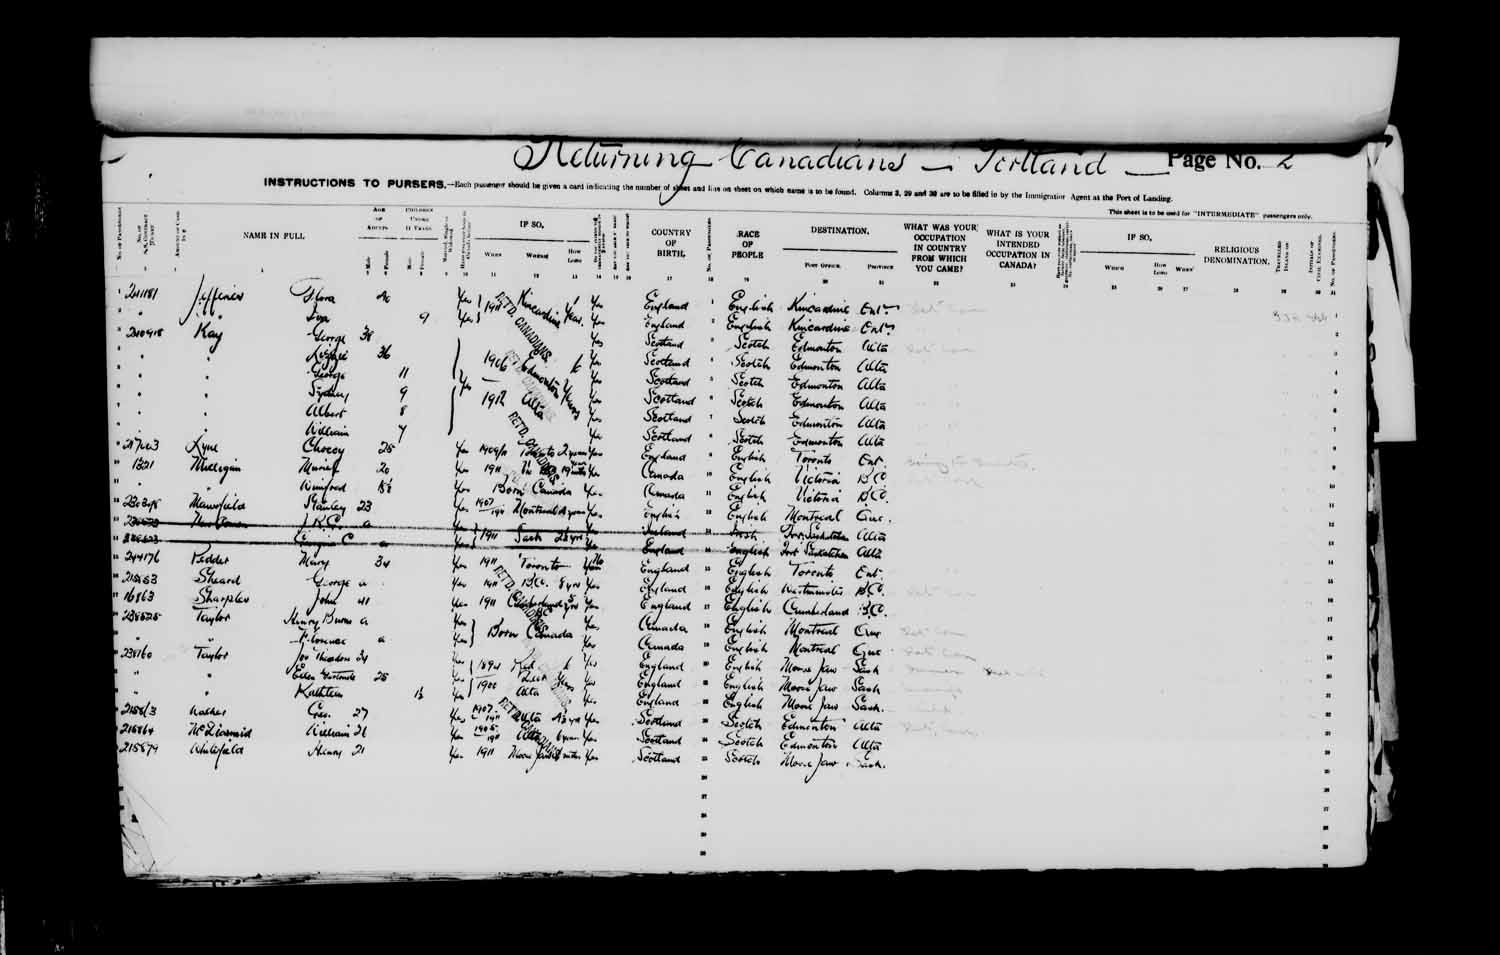 Digitized page of Passenger Lists for Image No.: e003622980